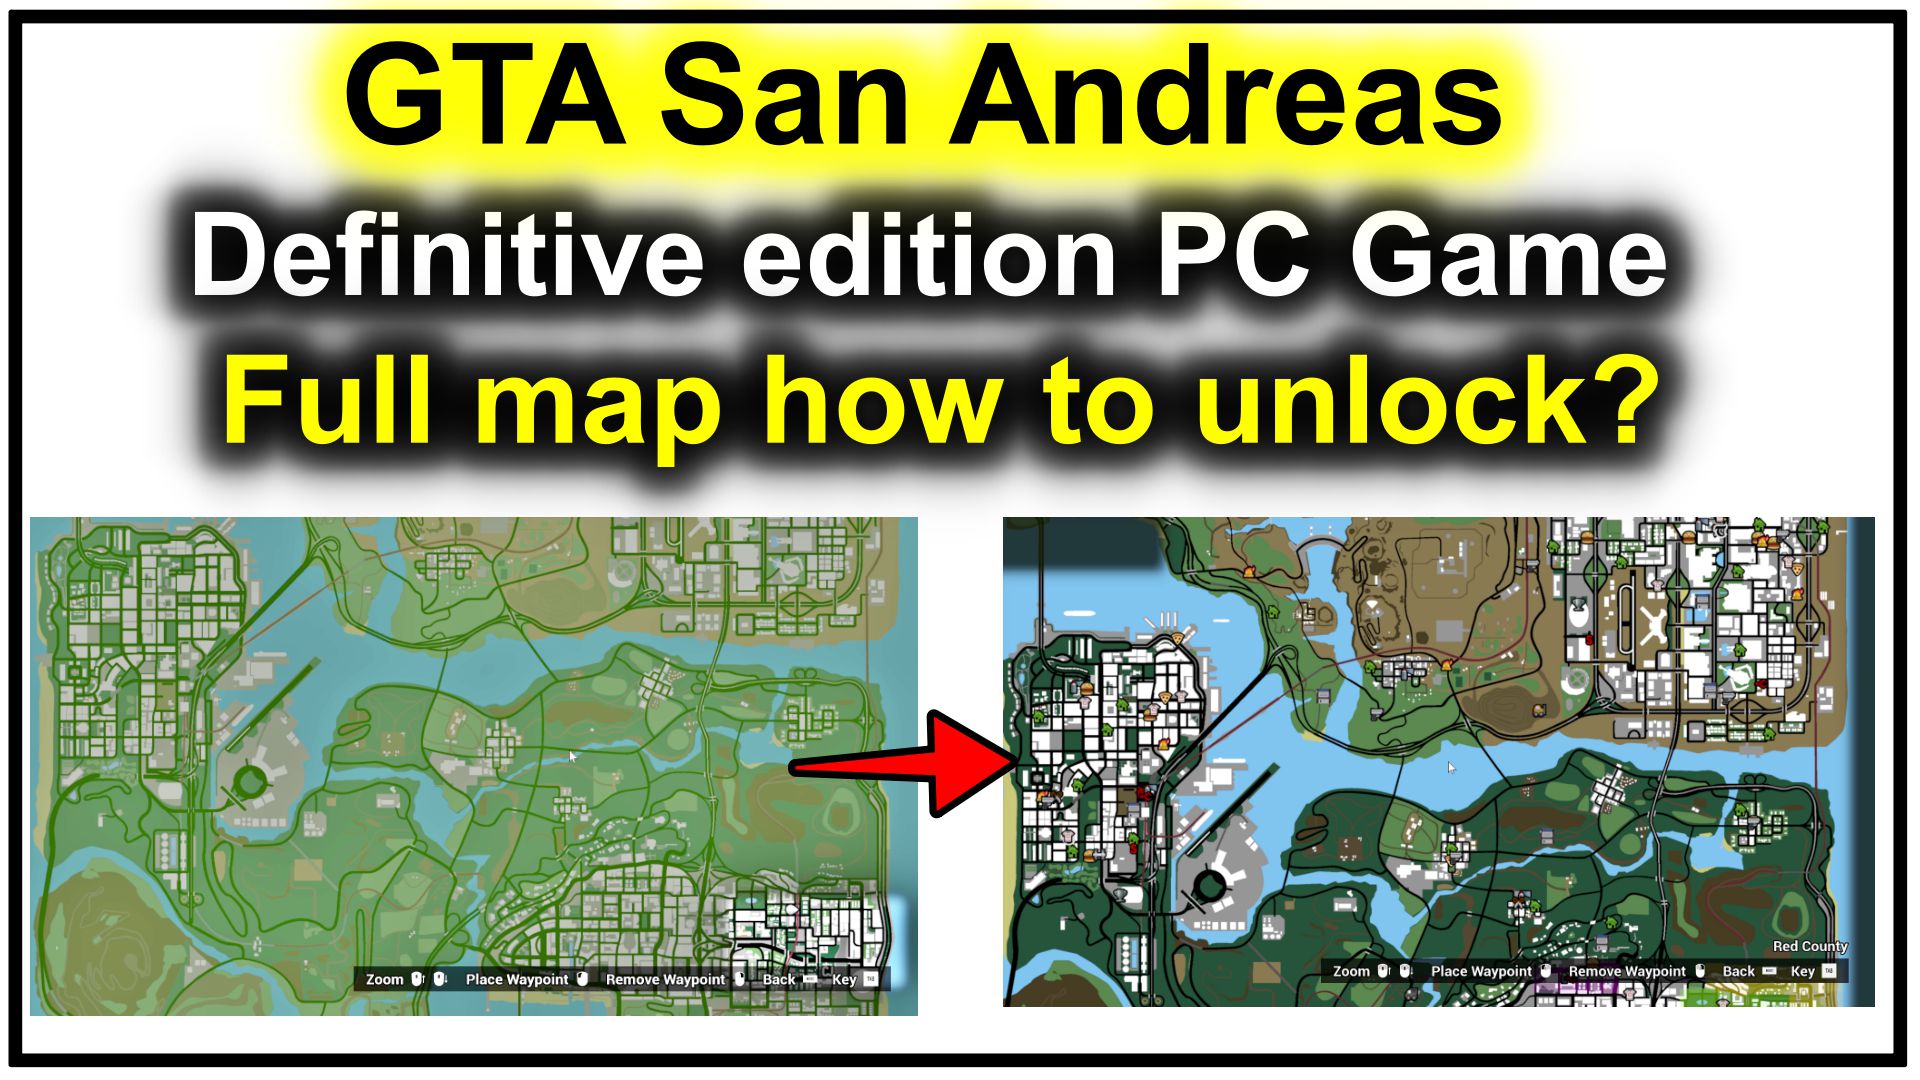 How to Unlock or open full map of GTA san Andreas Definitive edition PC game